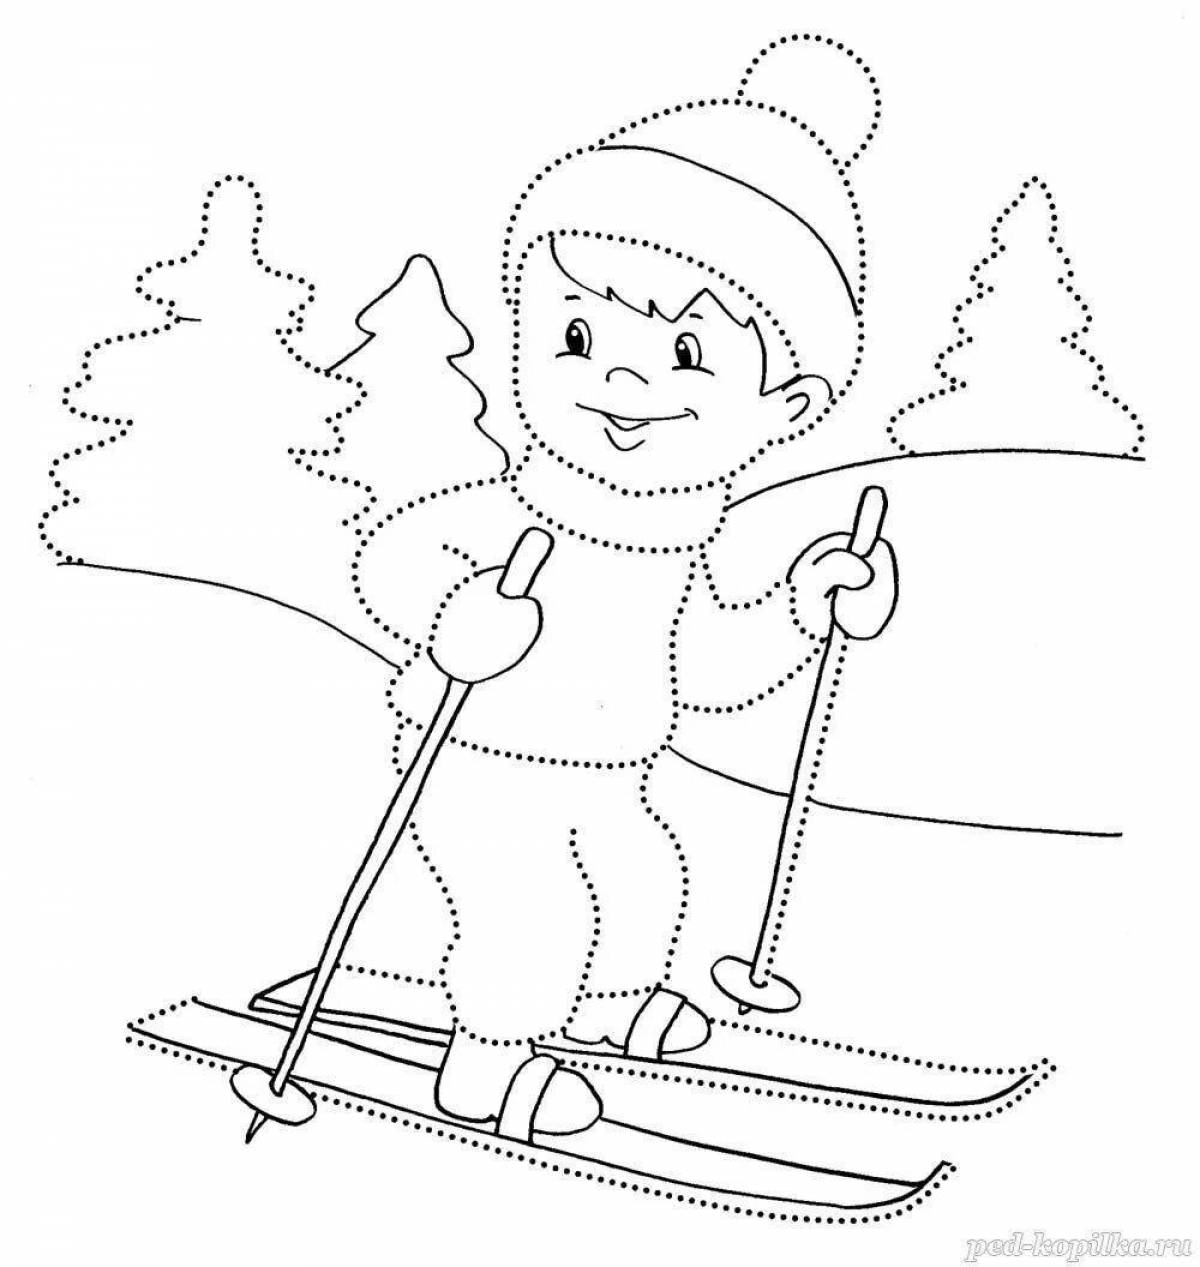 Adventurous skier coloring book for 6-7 year olds